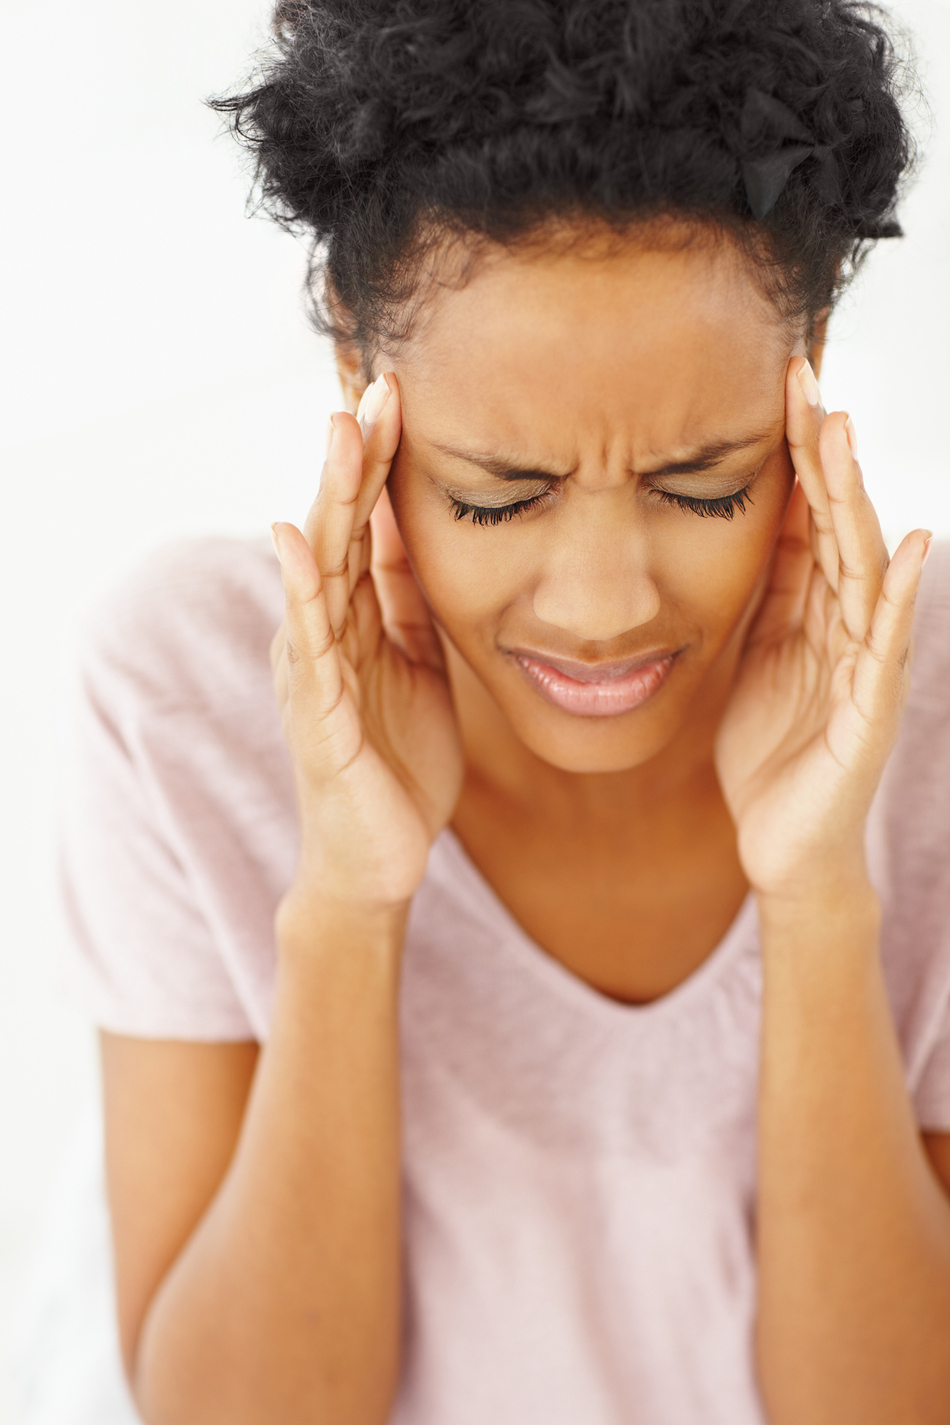 Are Your Headaches Severe Enough to Visit a Doctor?